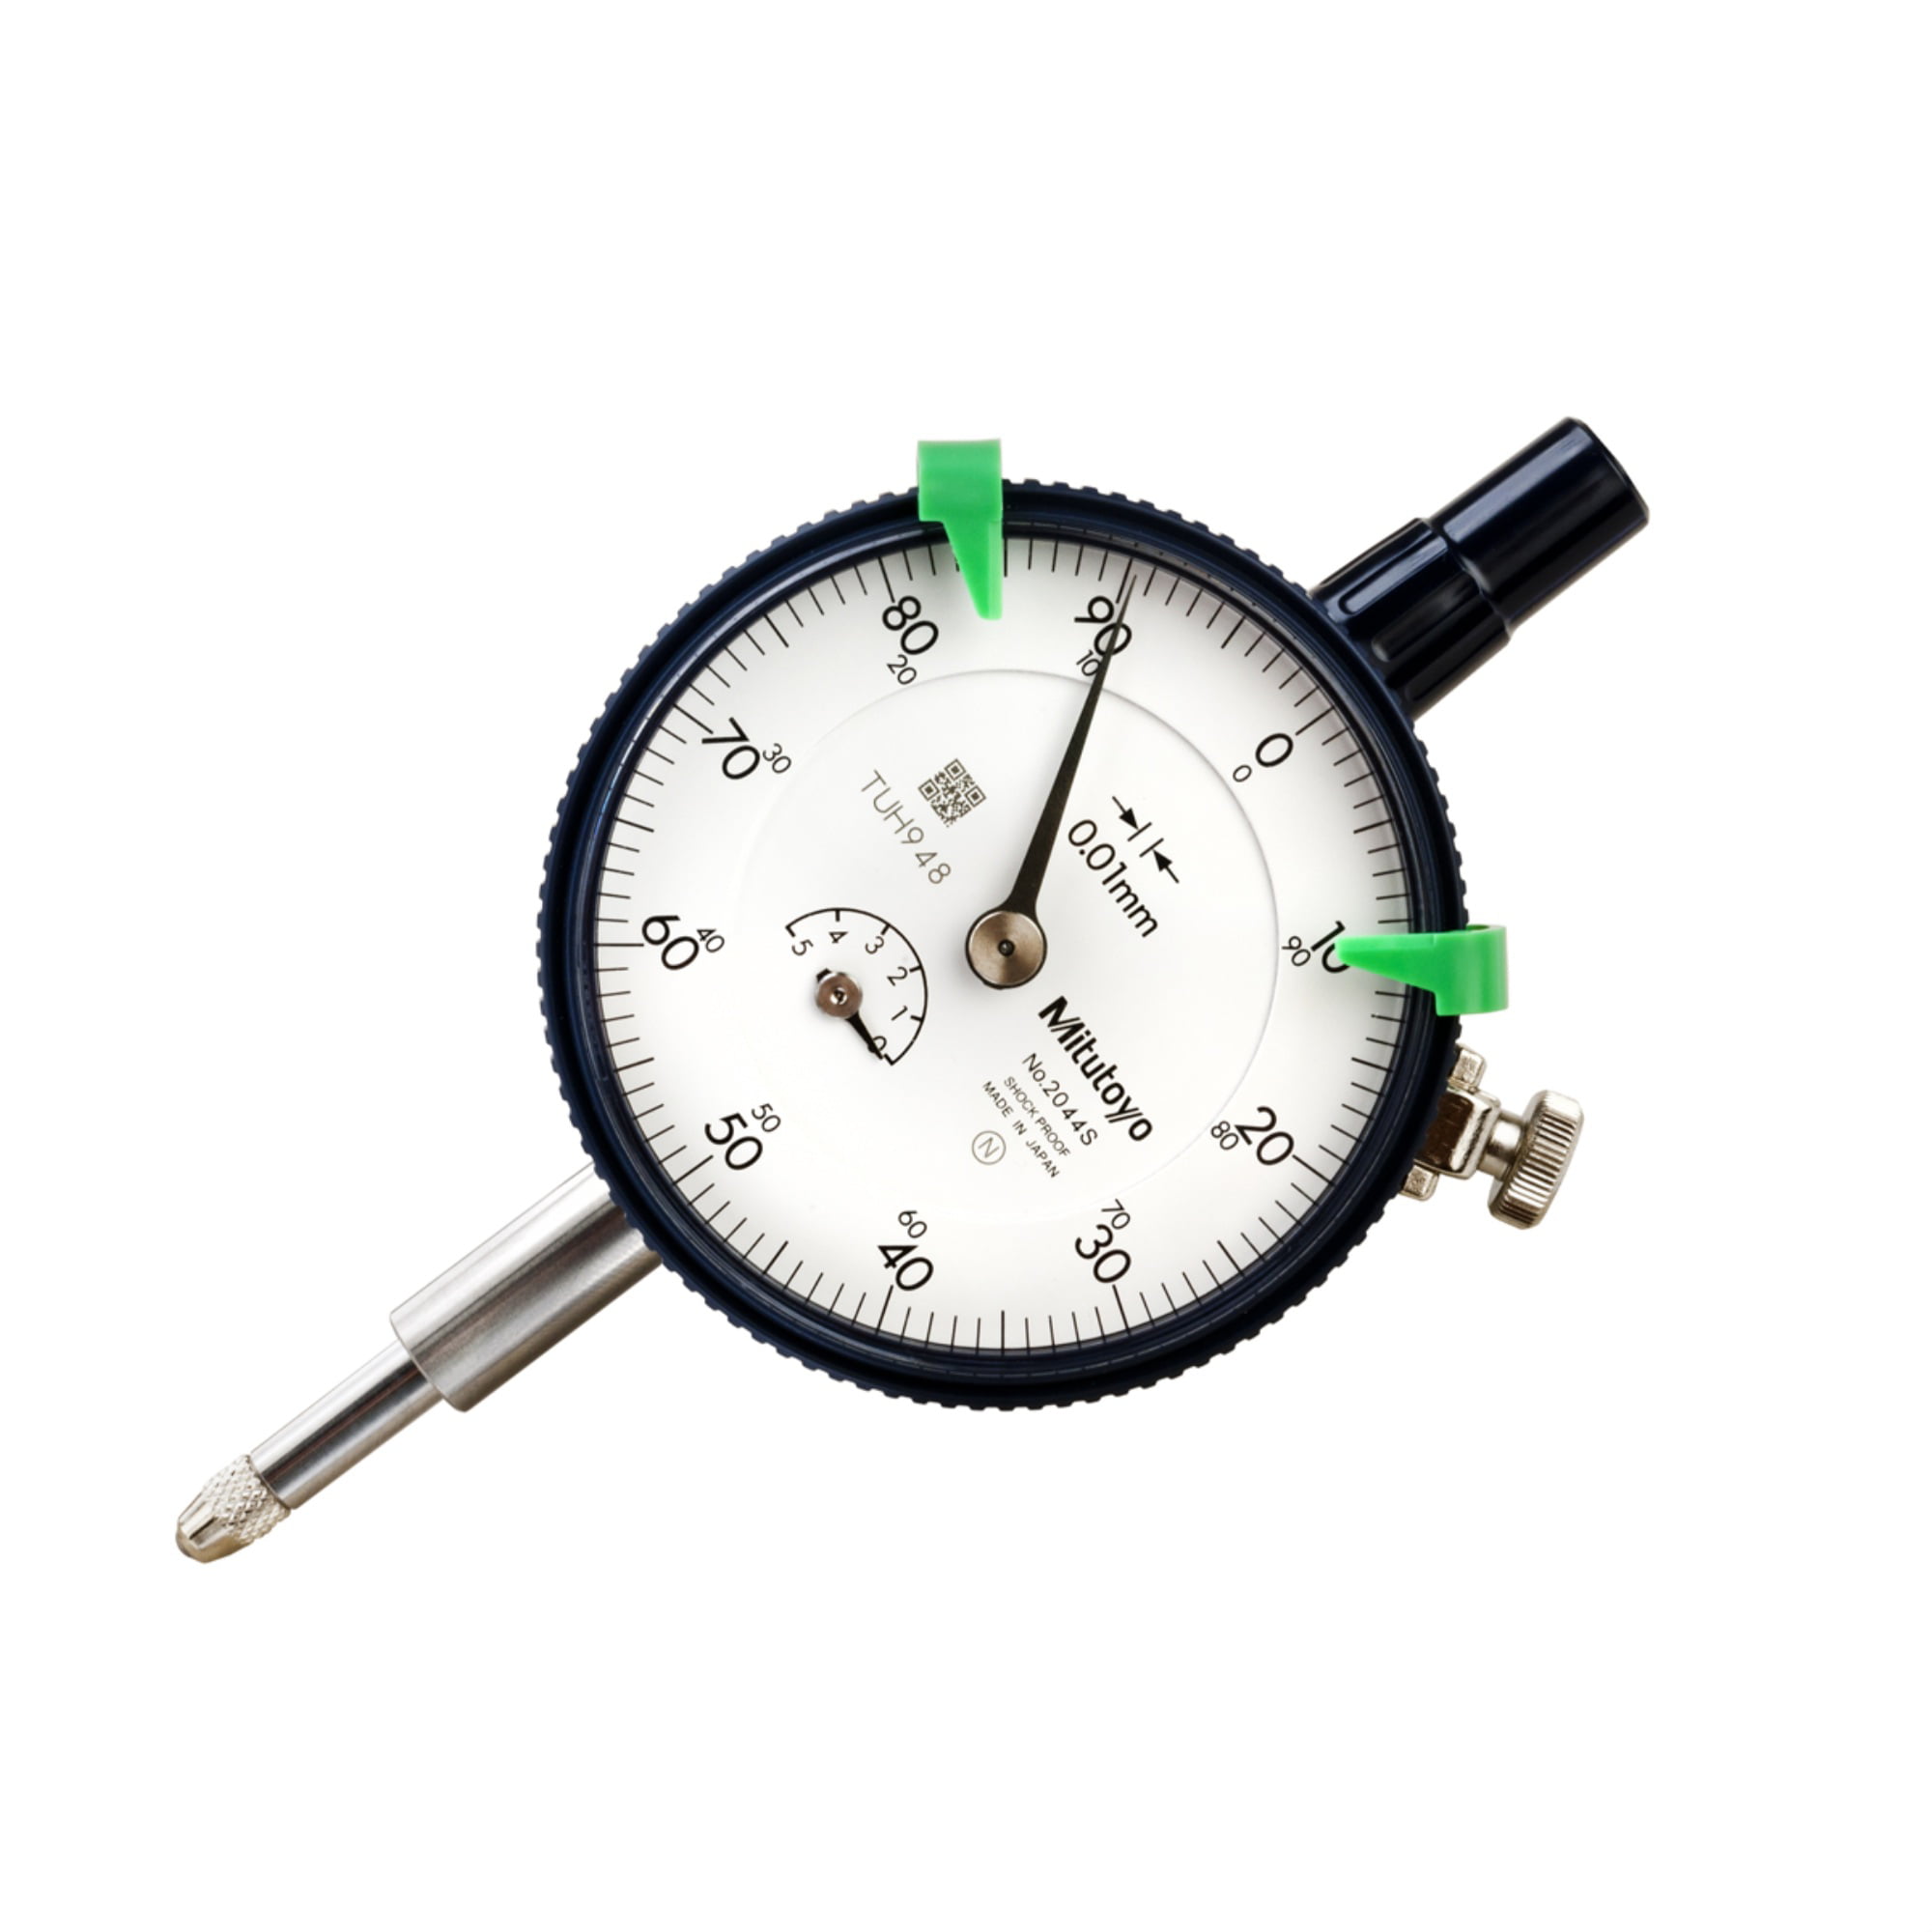 Dial Indicator Holder Dial Indicator Support Stand 8mm for Dial Gauges Measurement Work School Laboratory